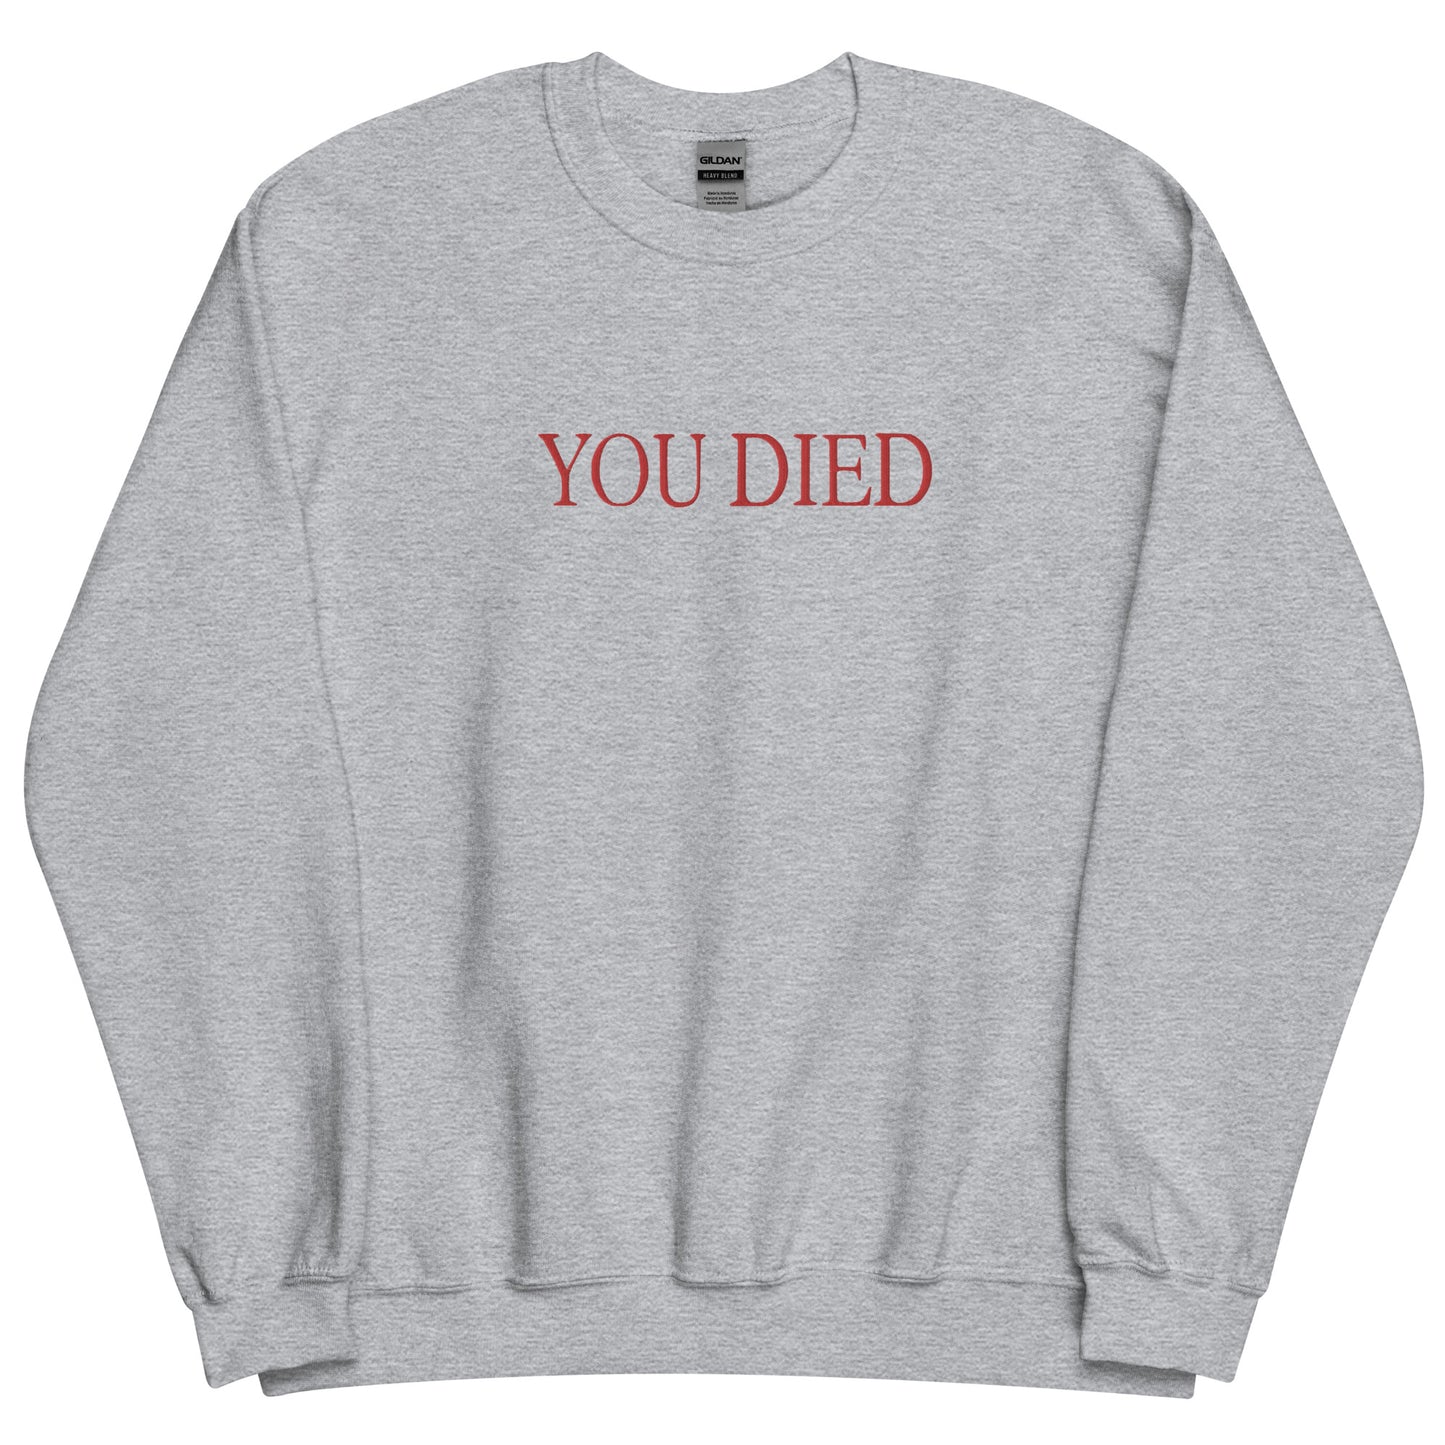 You died Sweatshirt Embroidered sweater crew neck